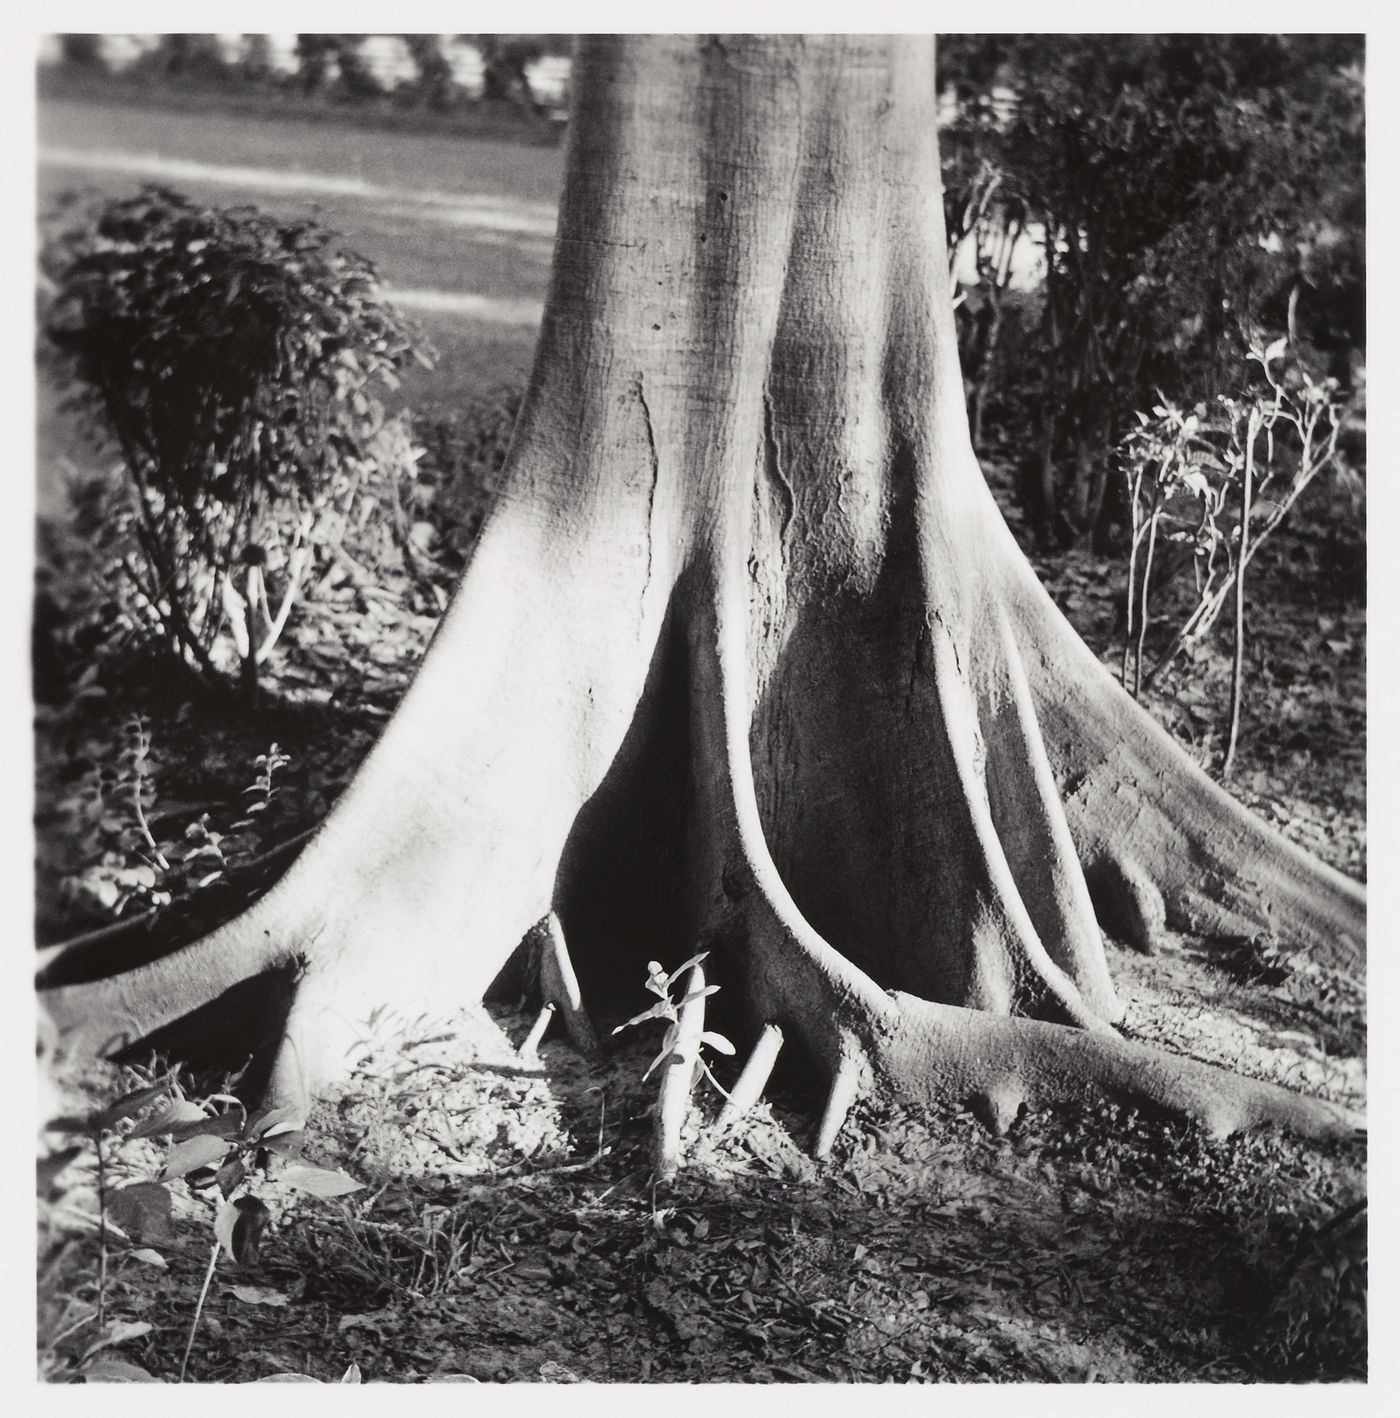 The buttress roots of a tree on the Chandigarh plain